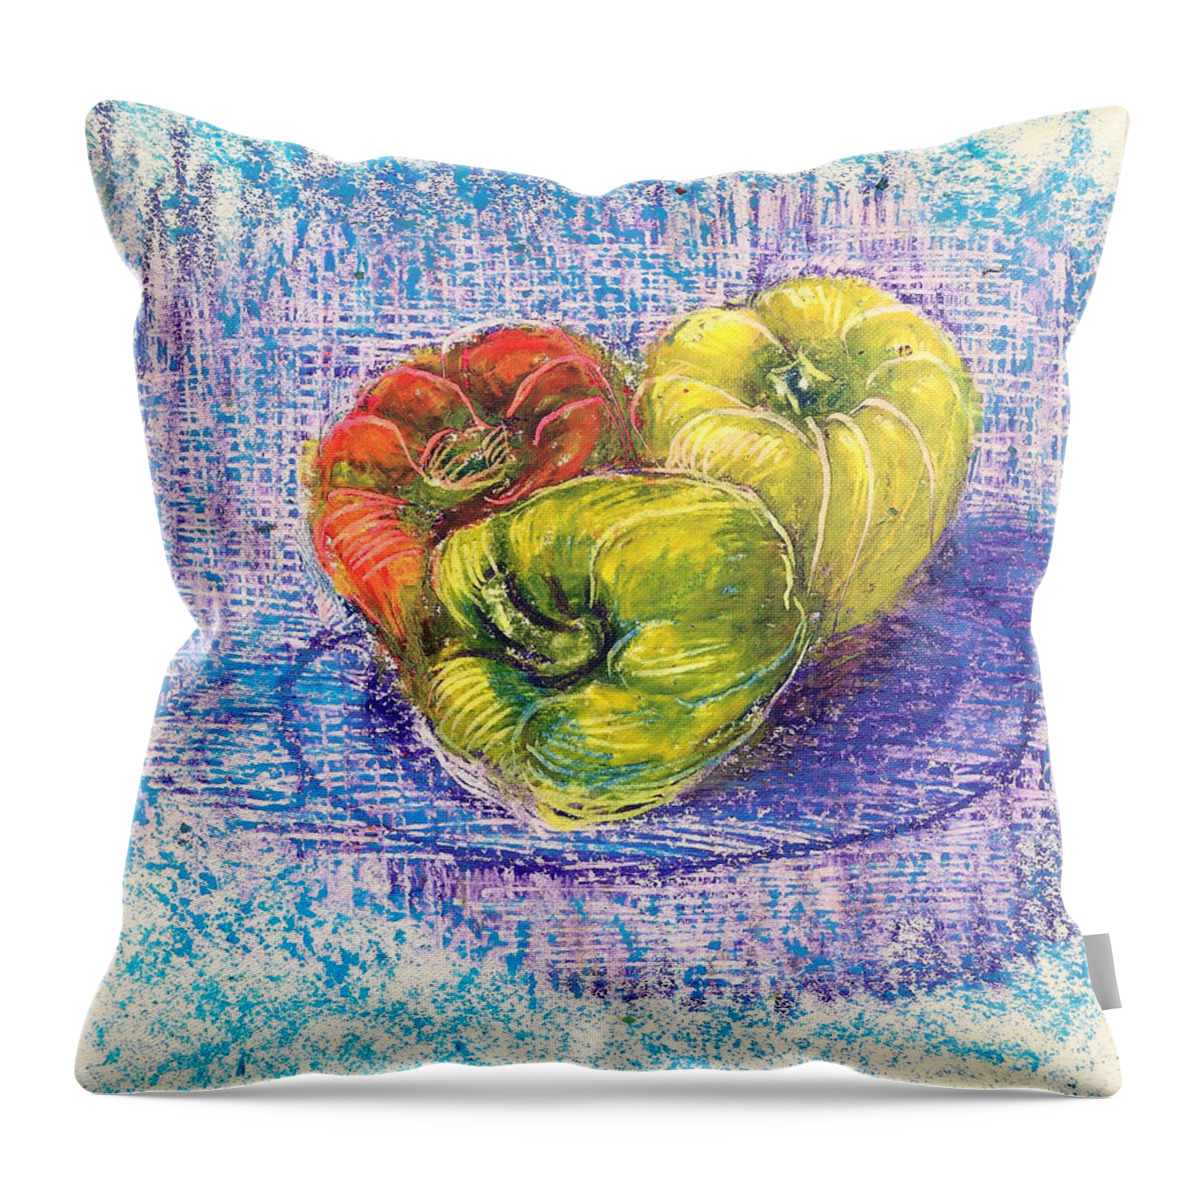 Three Capsicums Throw Pillow featuring the drawing Three capsicums by Asha Sudhaker Shenoy